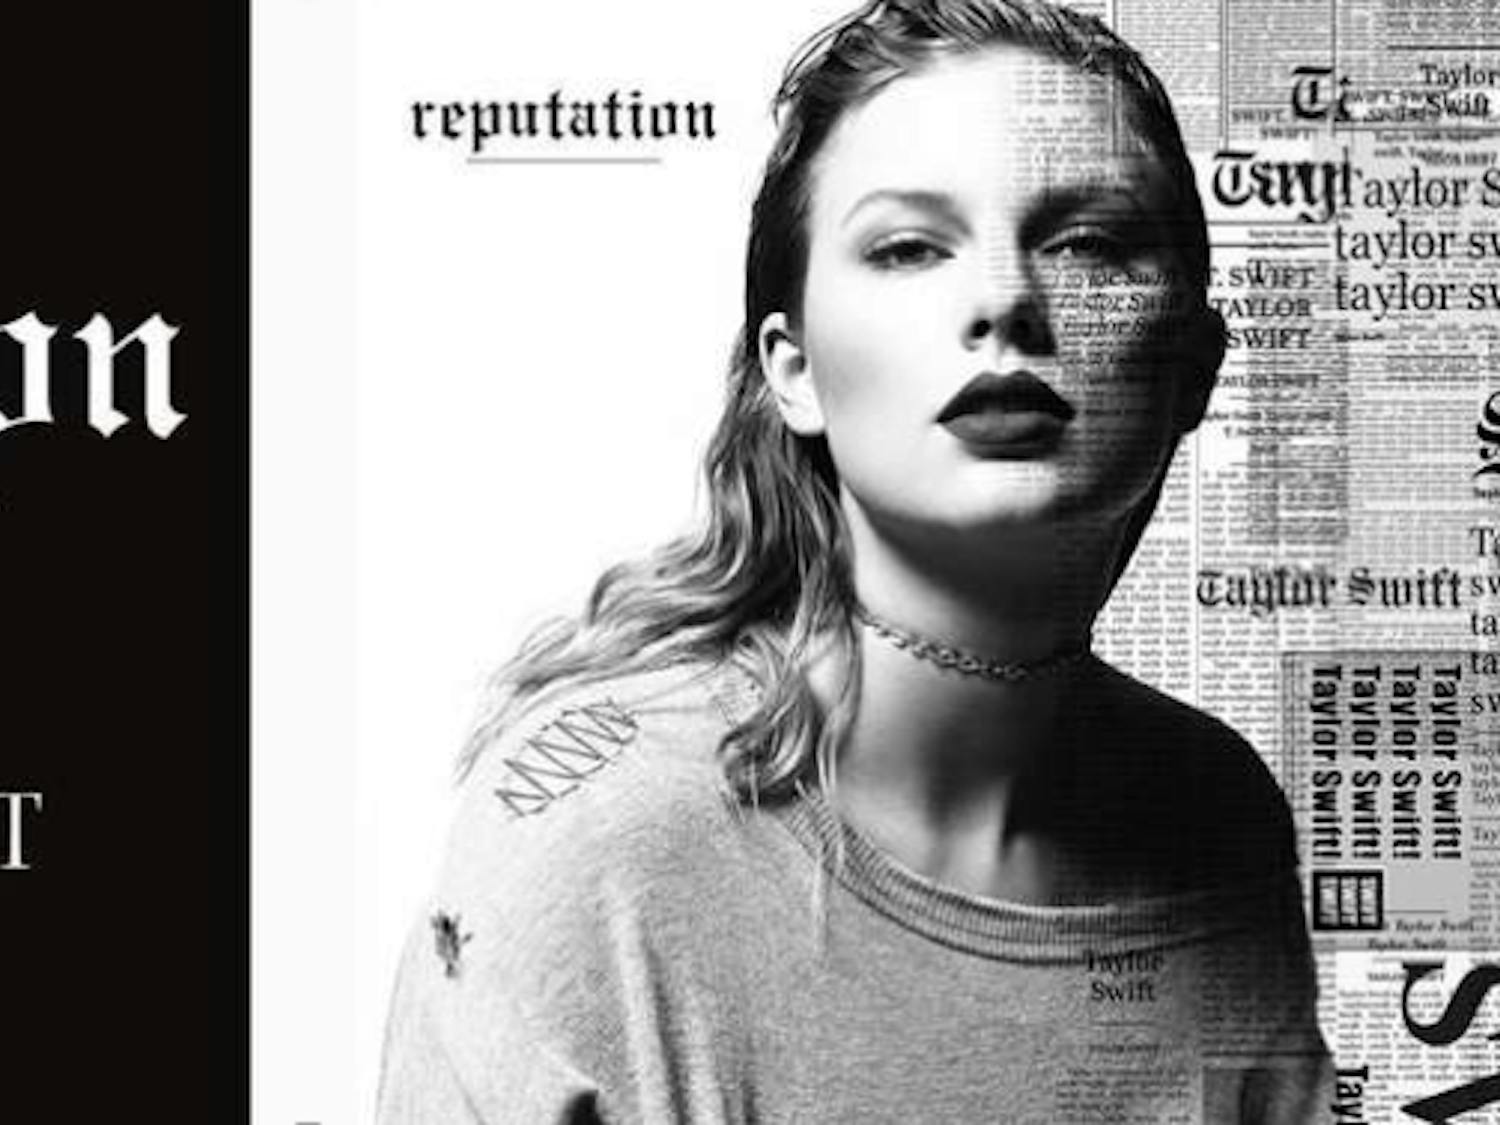 New album from Taylor Swift. ​